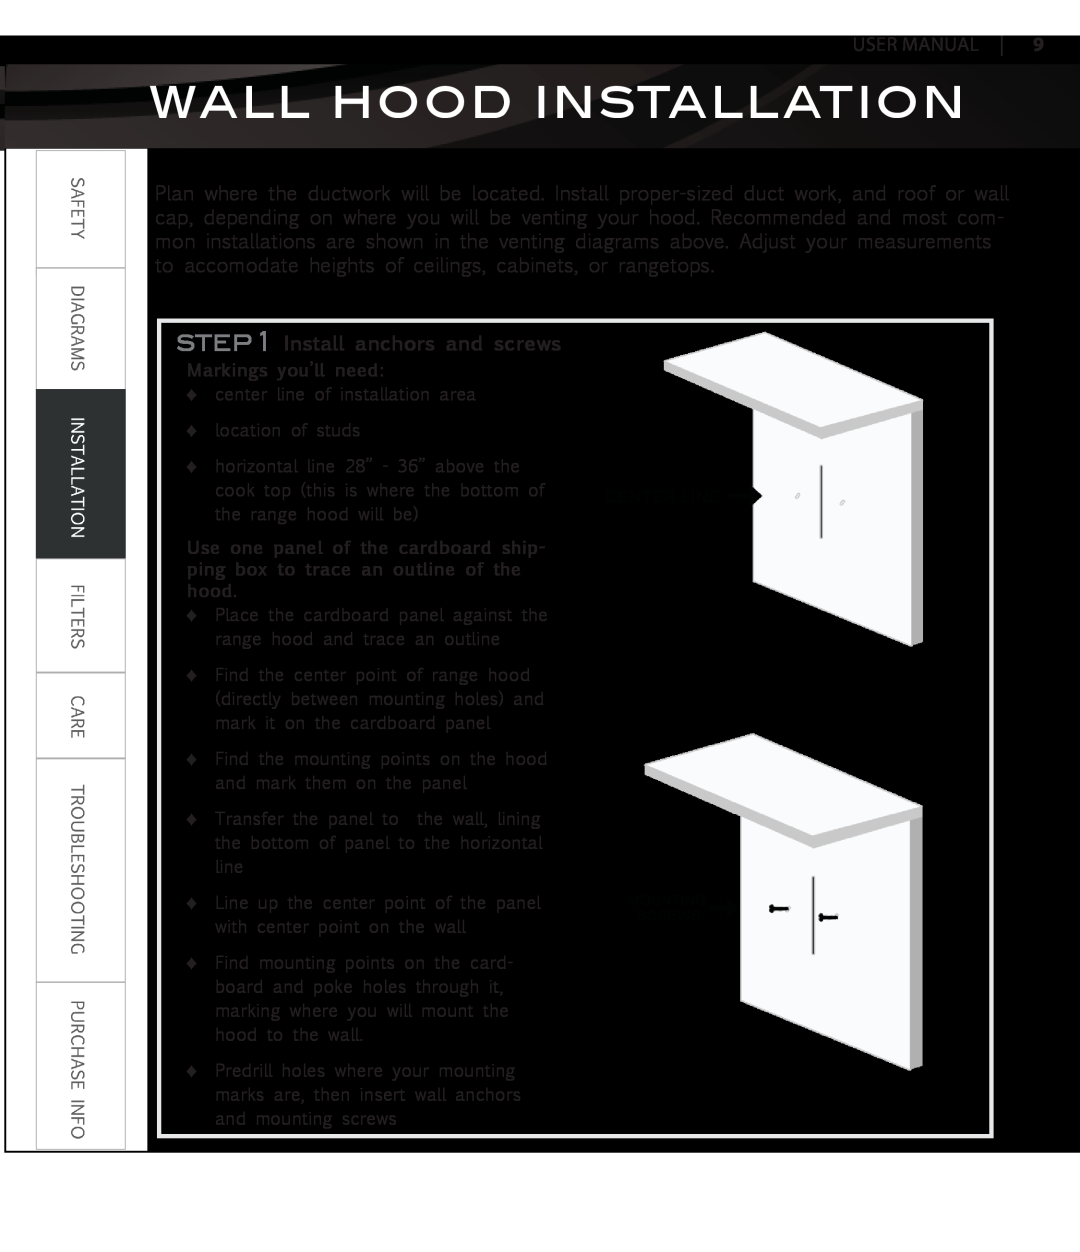 Proline PLJW109, PLJW129, PLJW125, PLFW108 Wall Hood Installation, Install anchors and screws, Markings you’ll need 